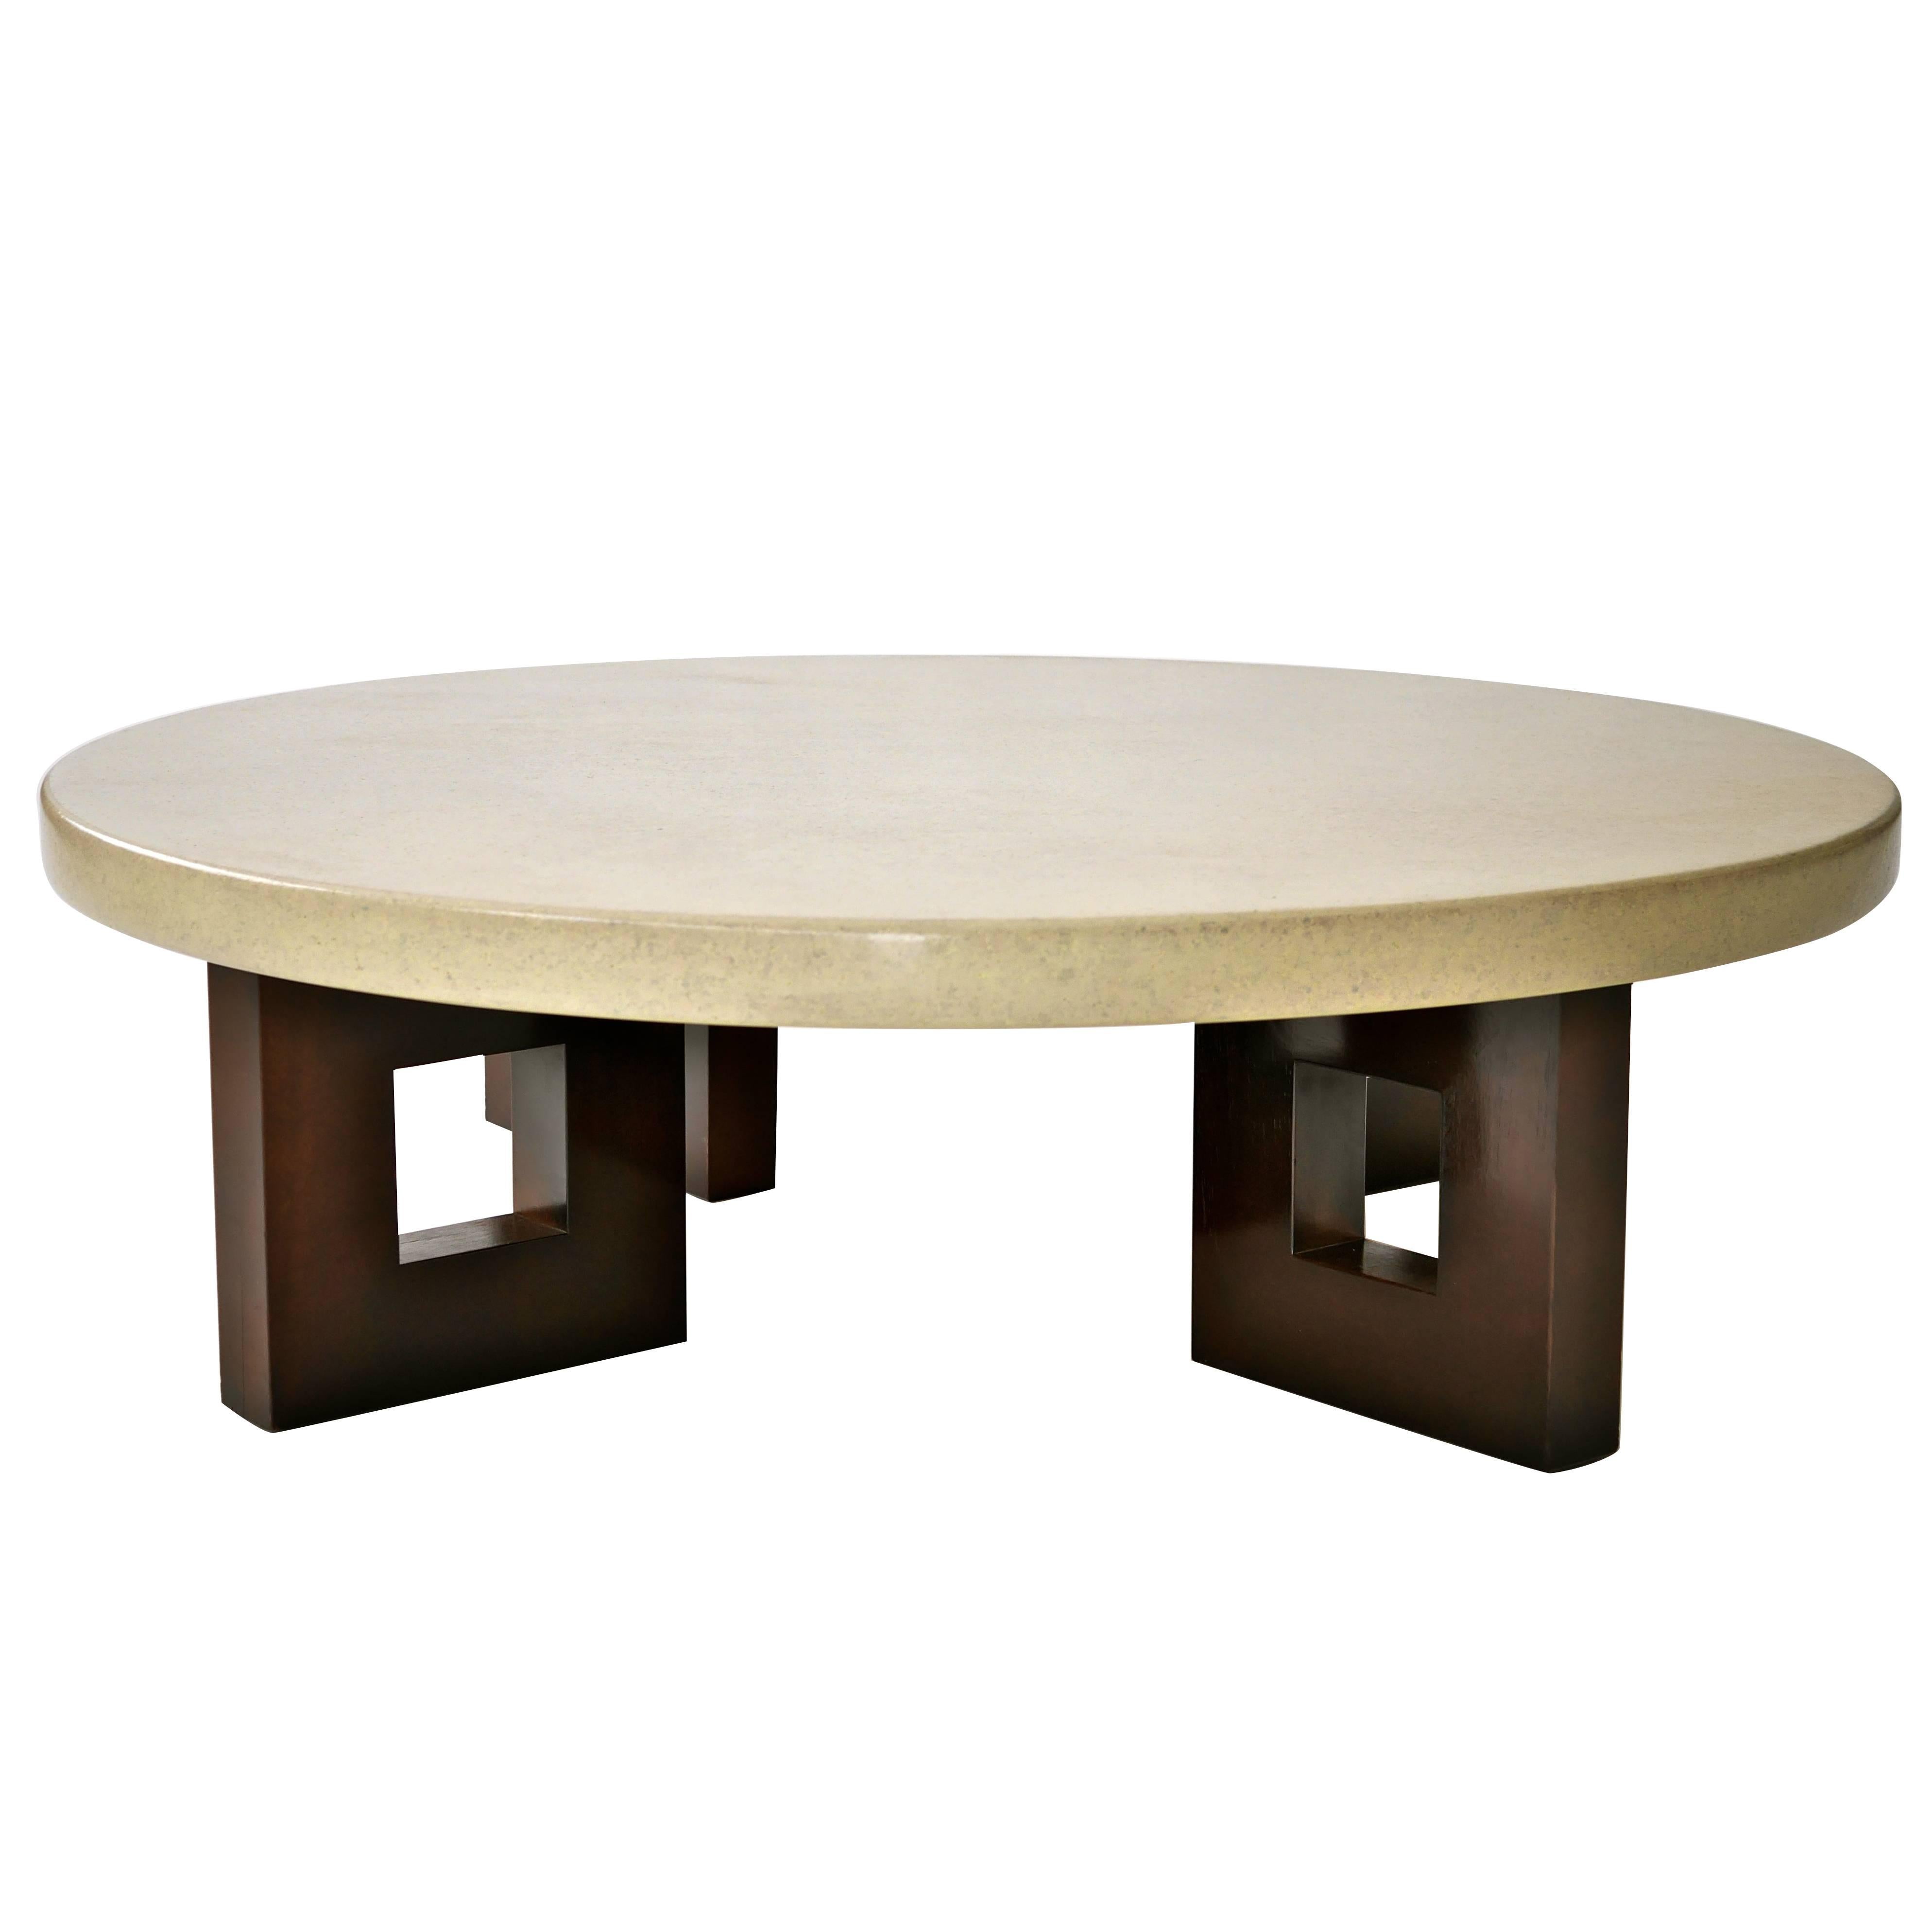 Paul Frankl Lacquered Cork Cocktail Table